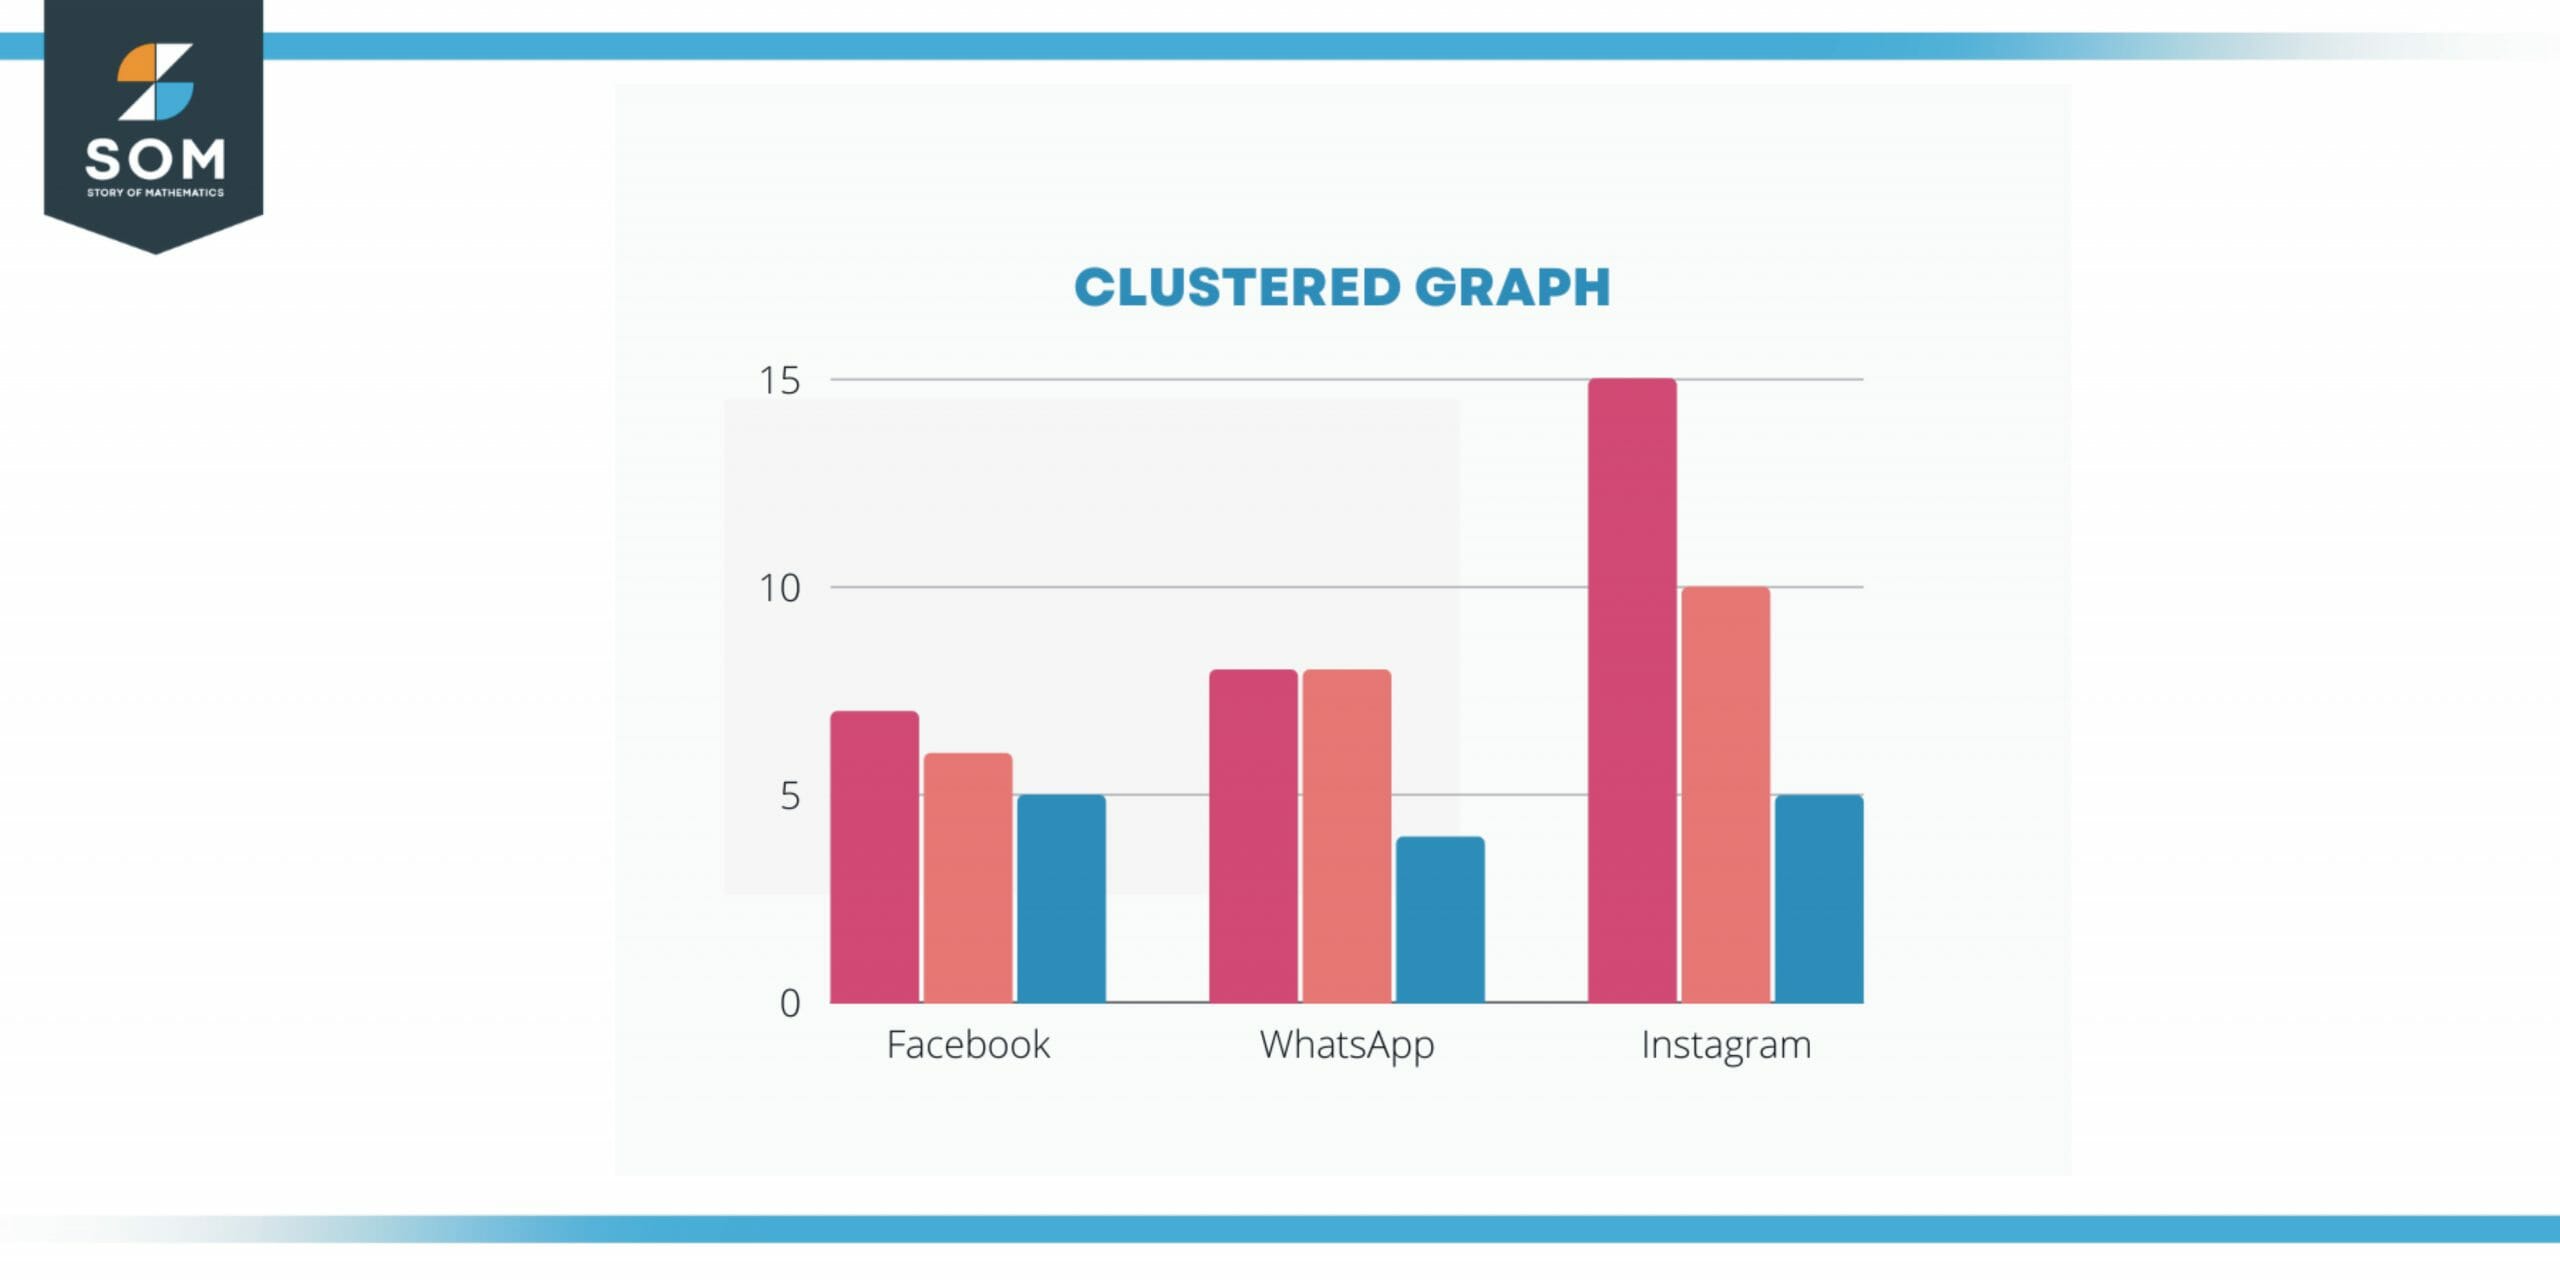 Clustered graph